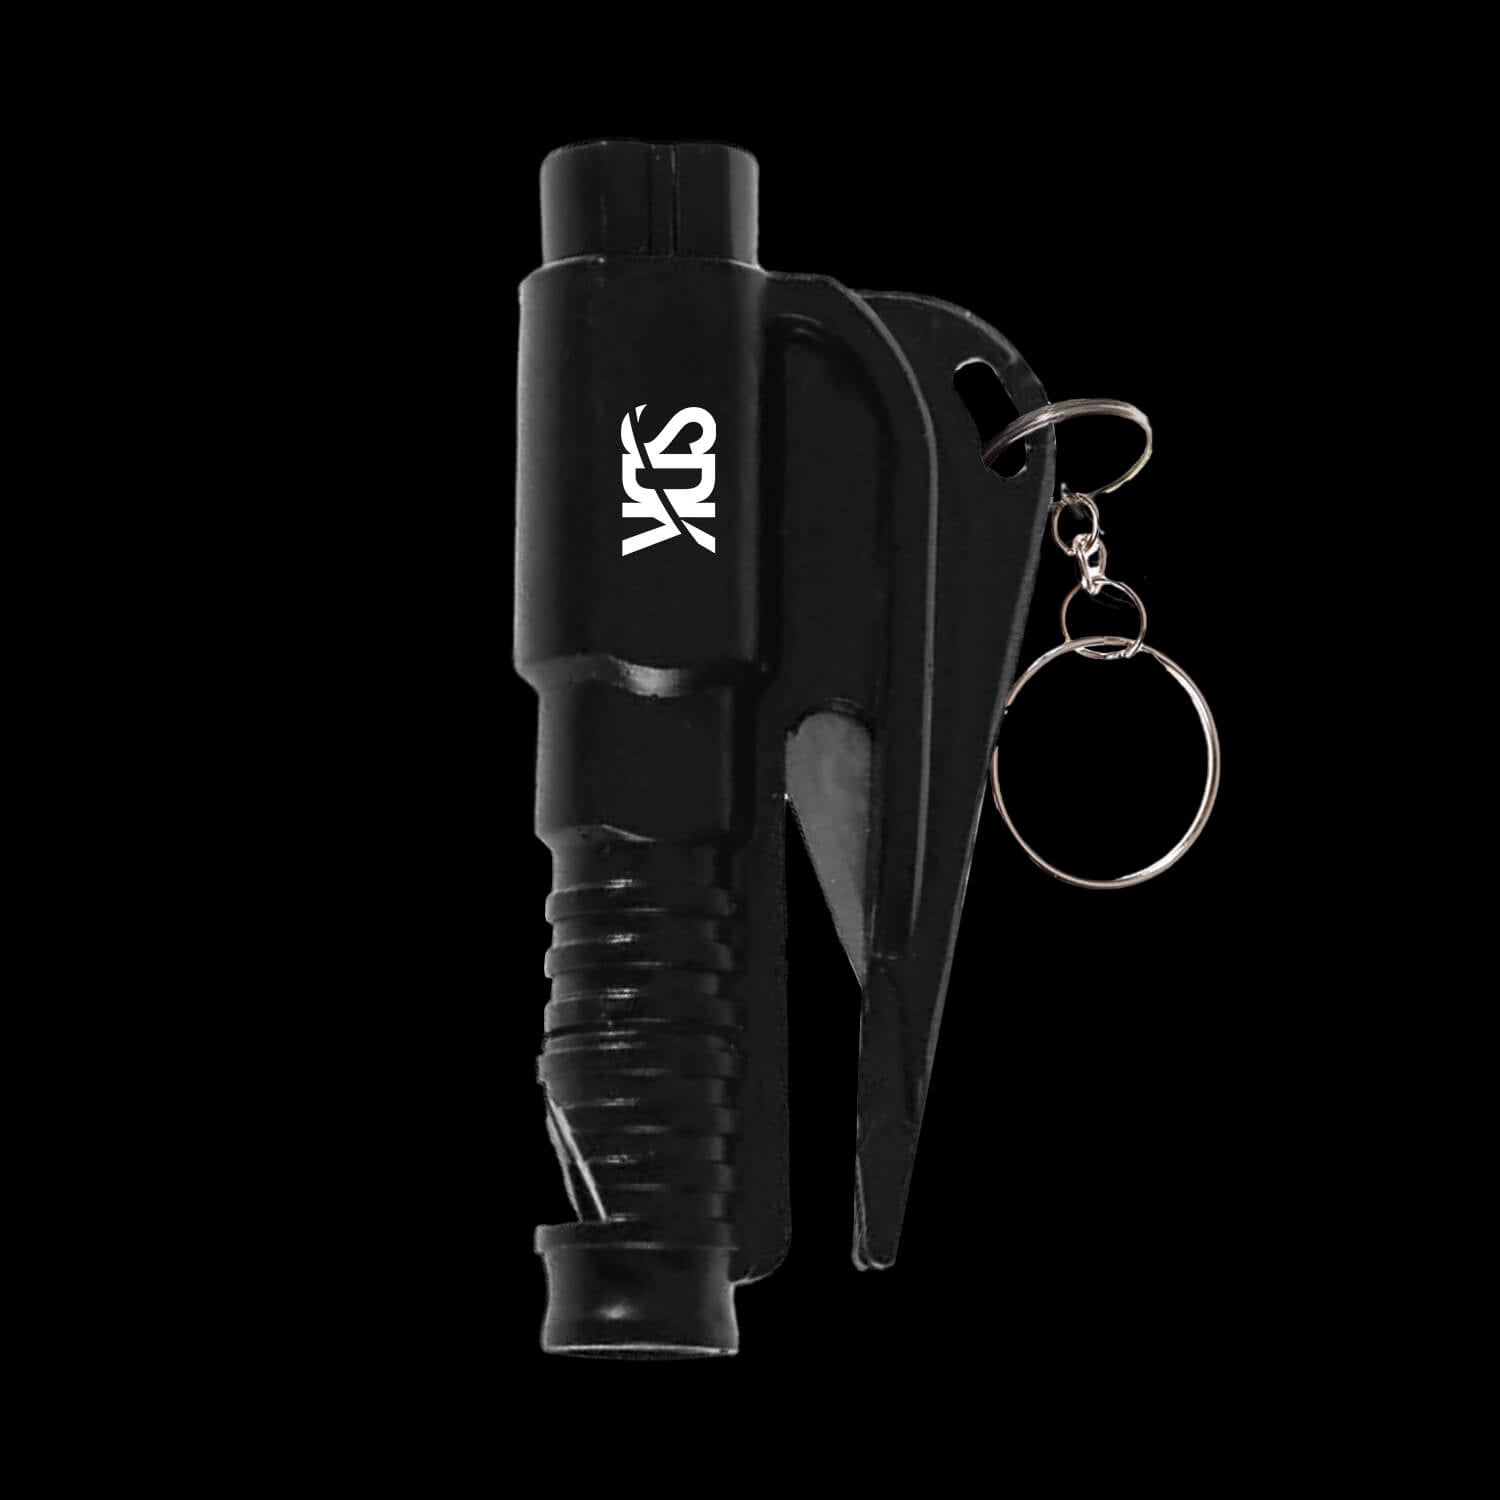 SDK Escape Tool Black (all-in-one seat belt cutter, window breaker and whistle)